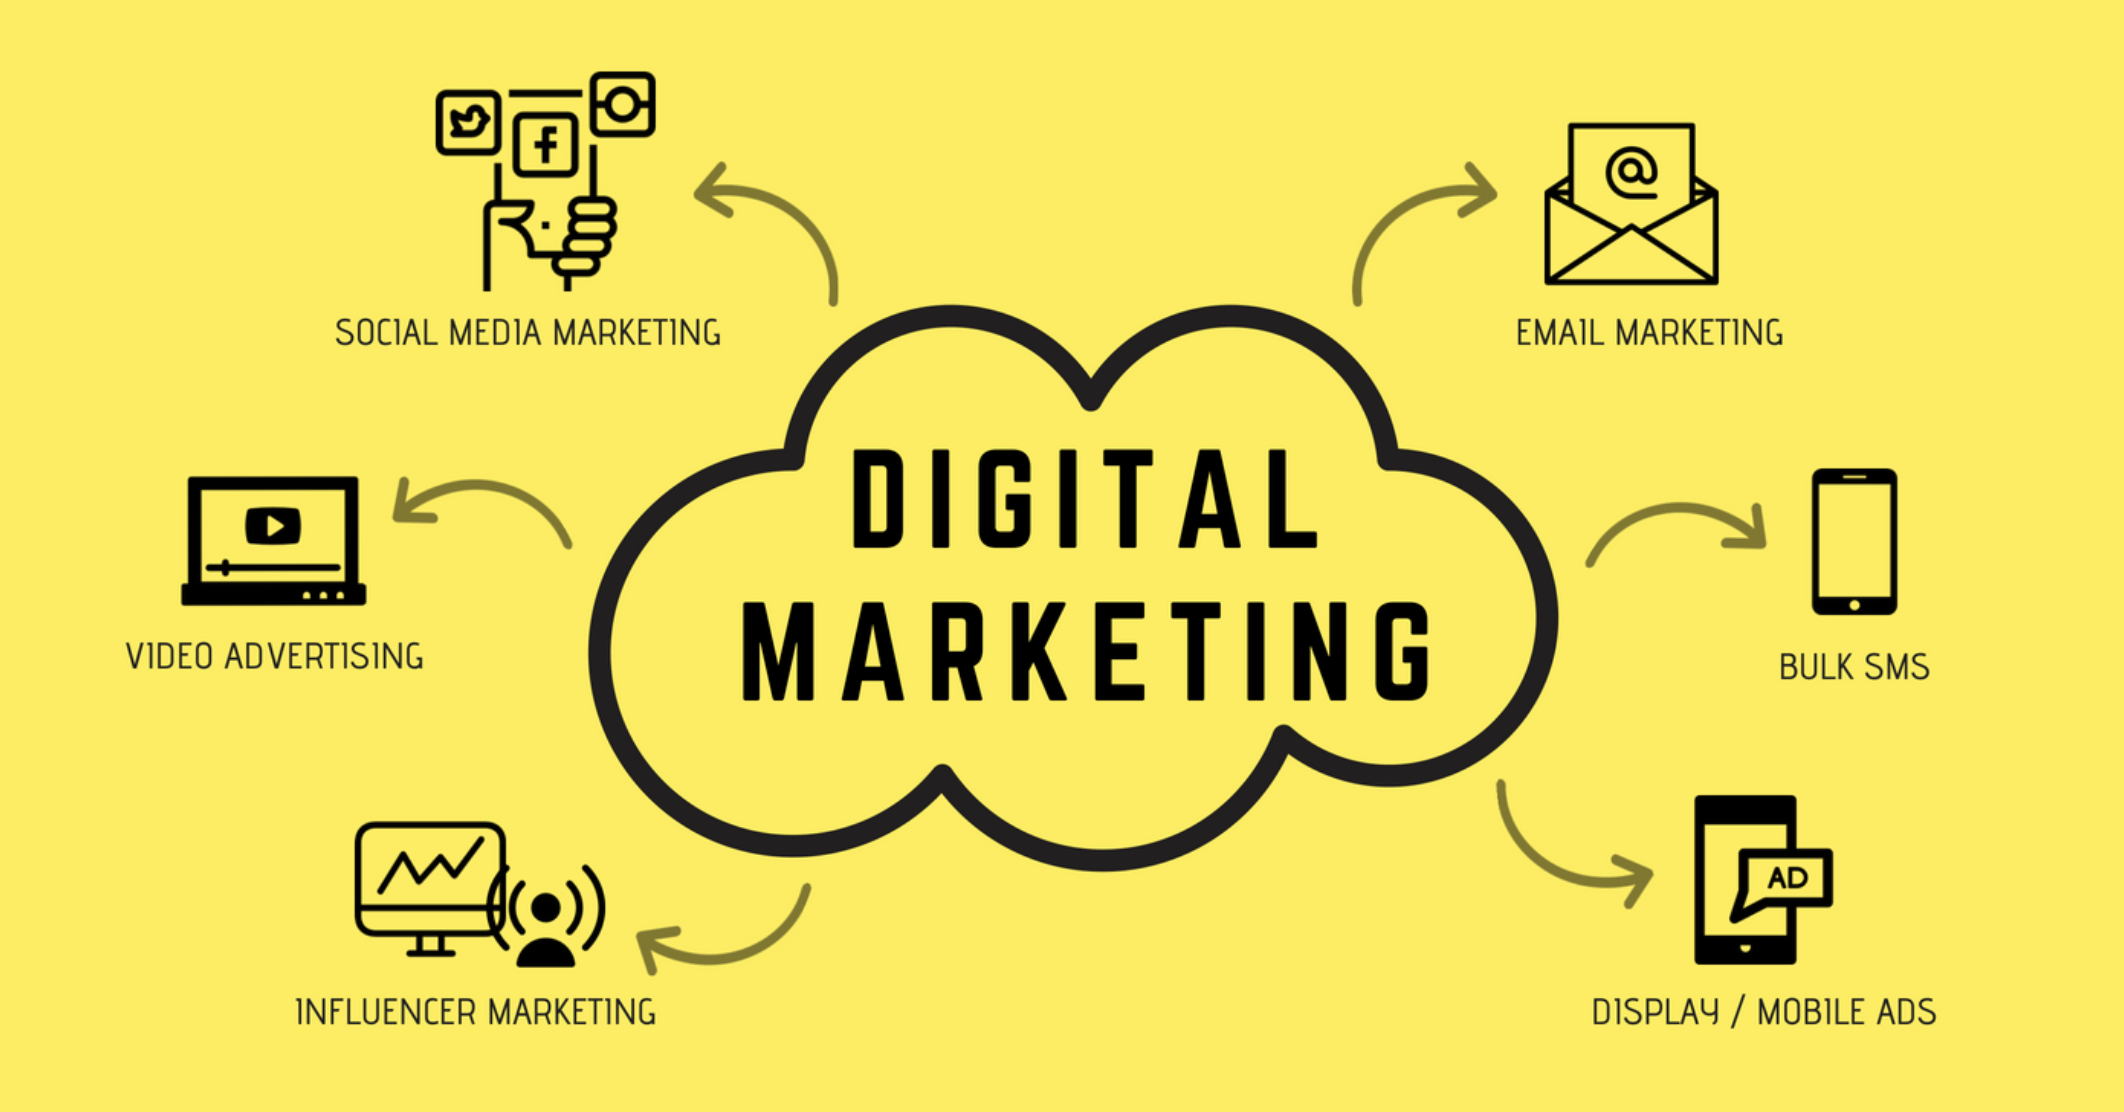 What is an example of digital marketing?